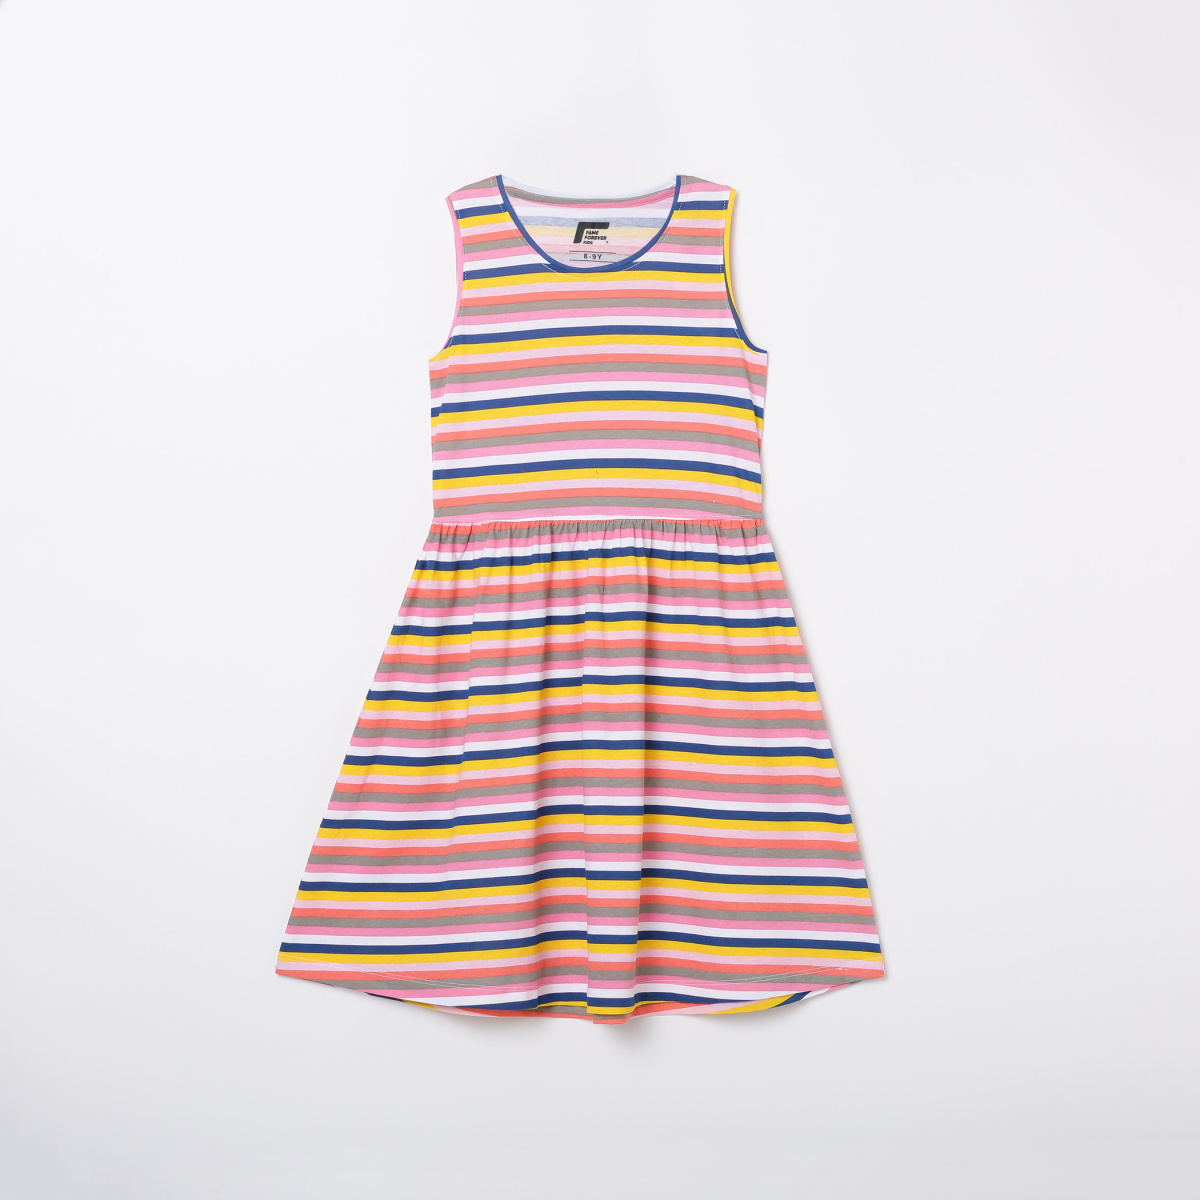 FAME FOREVER YOUNG Girls Striped A-Line Dress